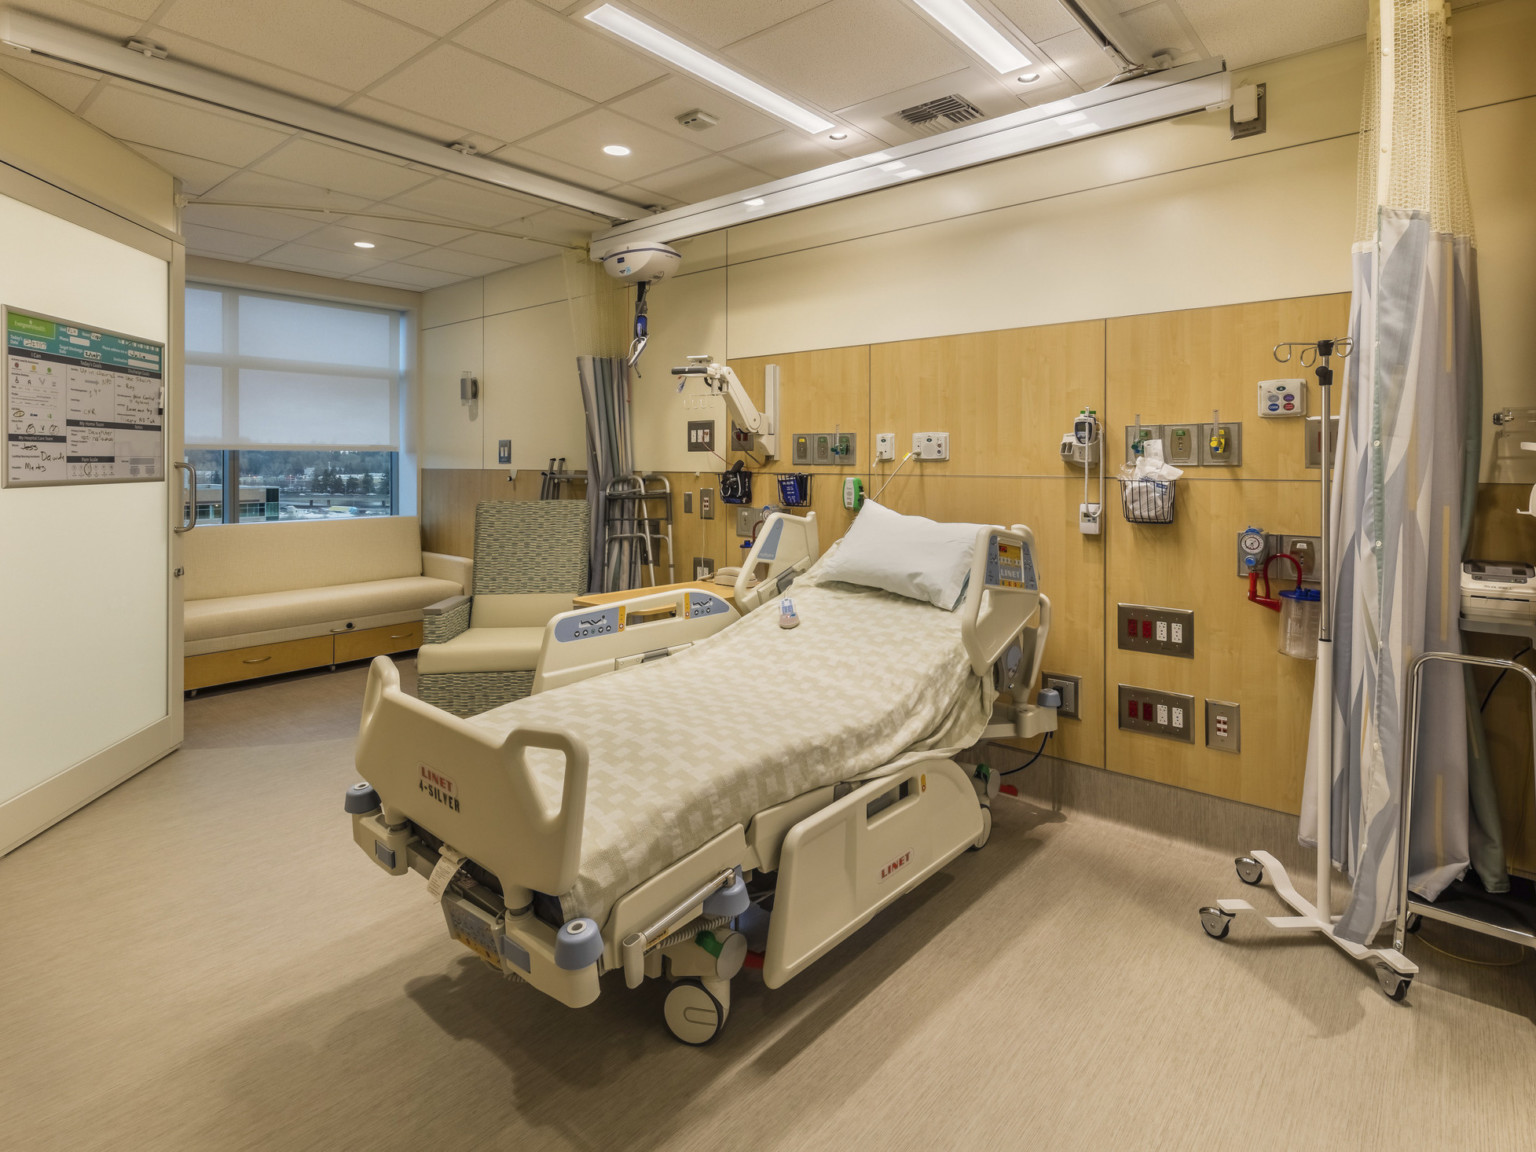 Hospital bed in white room against wall with wood panel accents and medical equipment. Flexible wall curtain at right